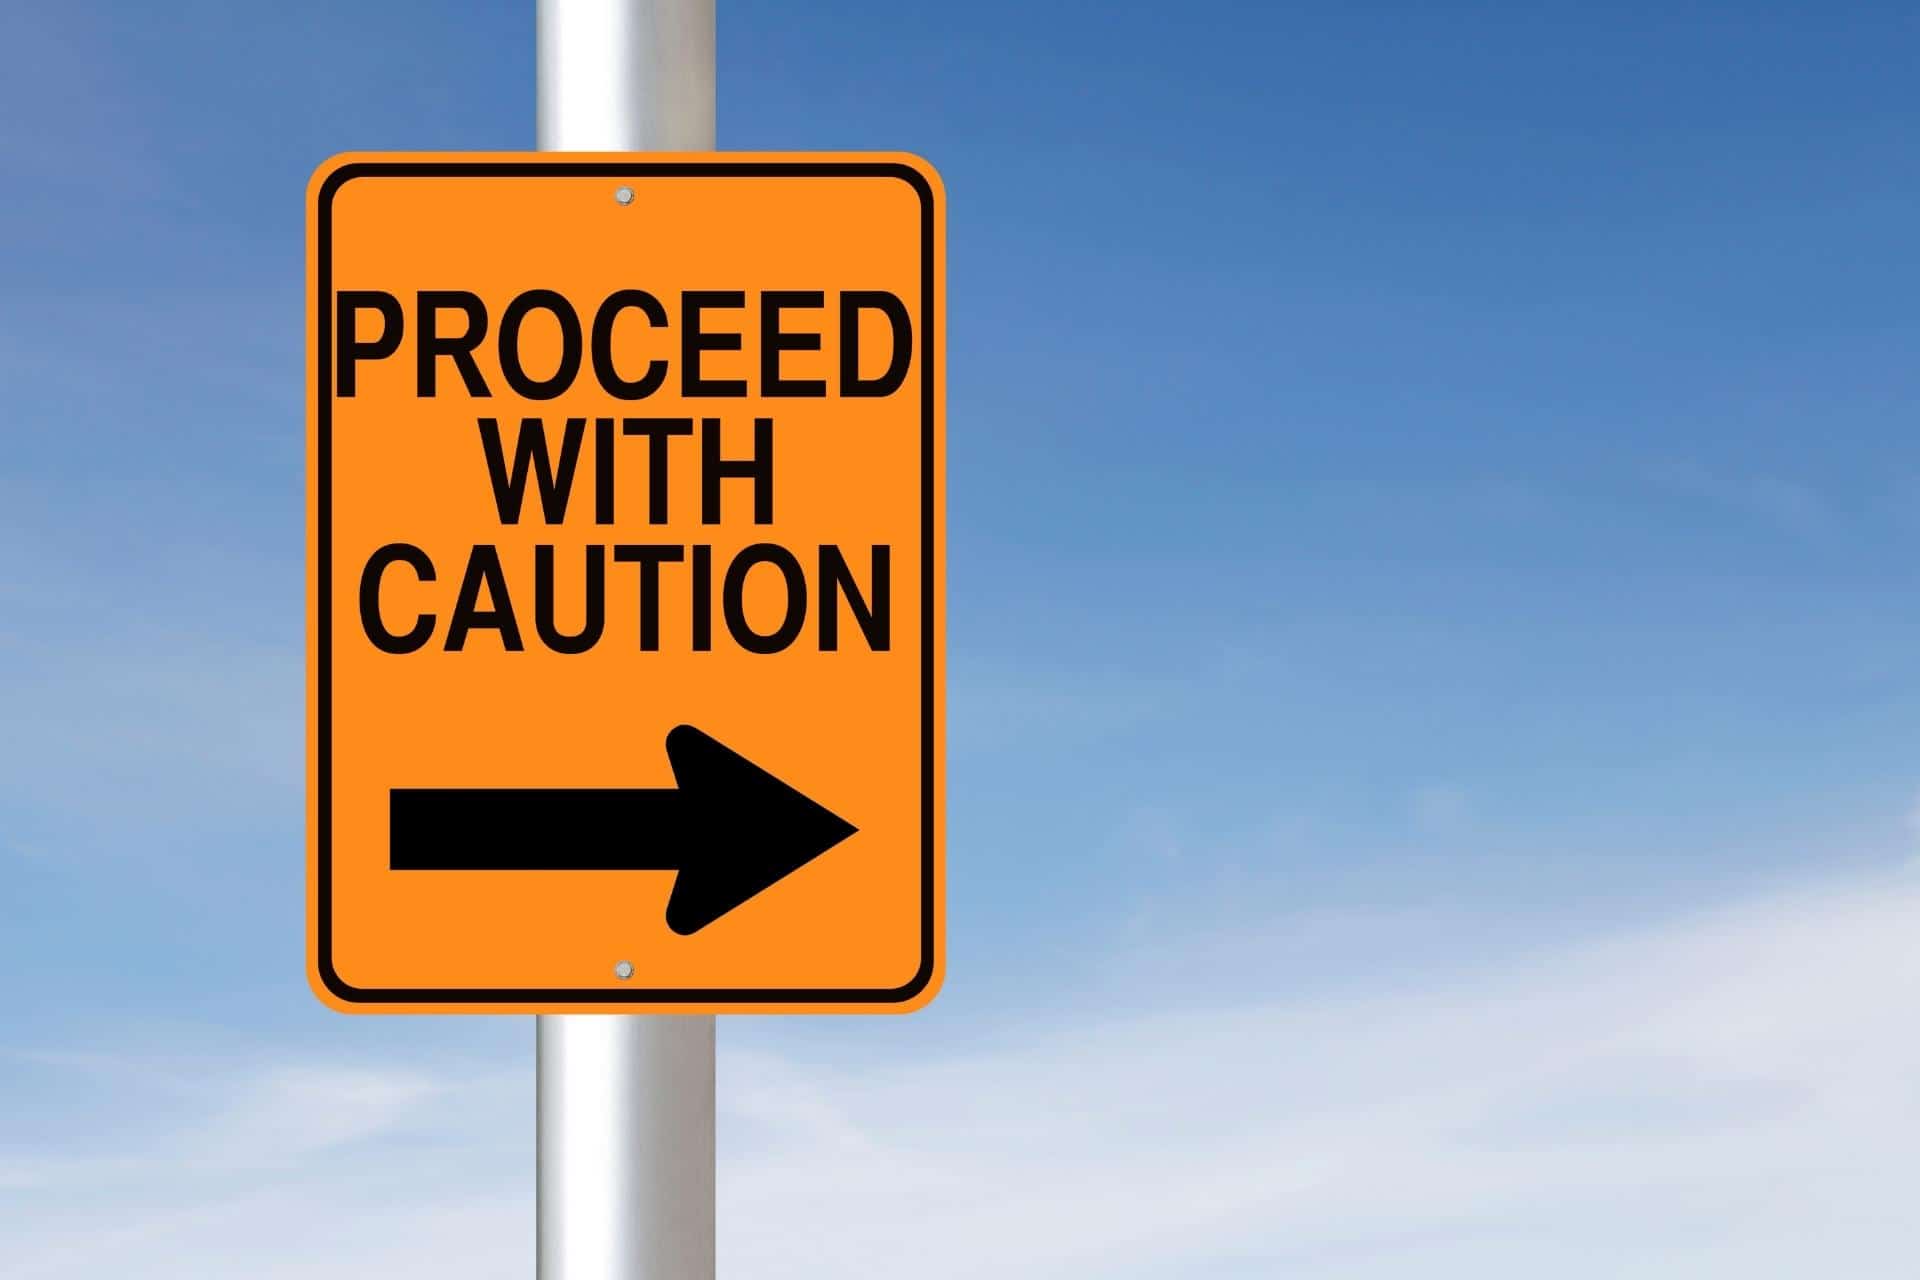 Street sign saying “Proceed with Caution” which is relevant for using RSO.